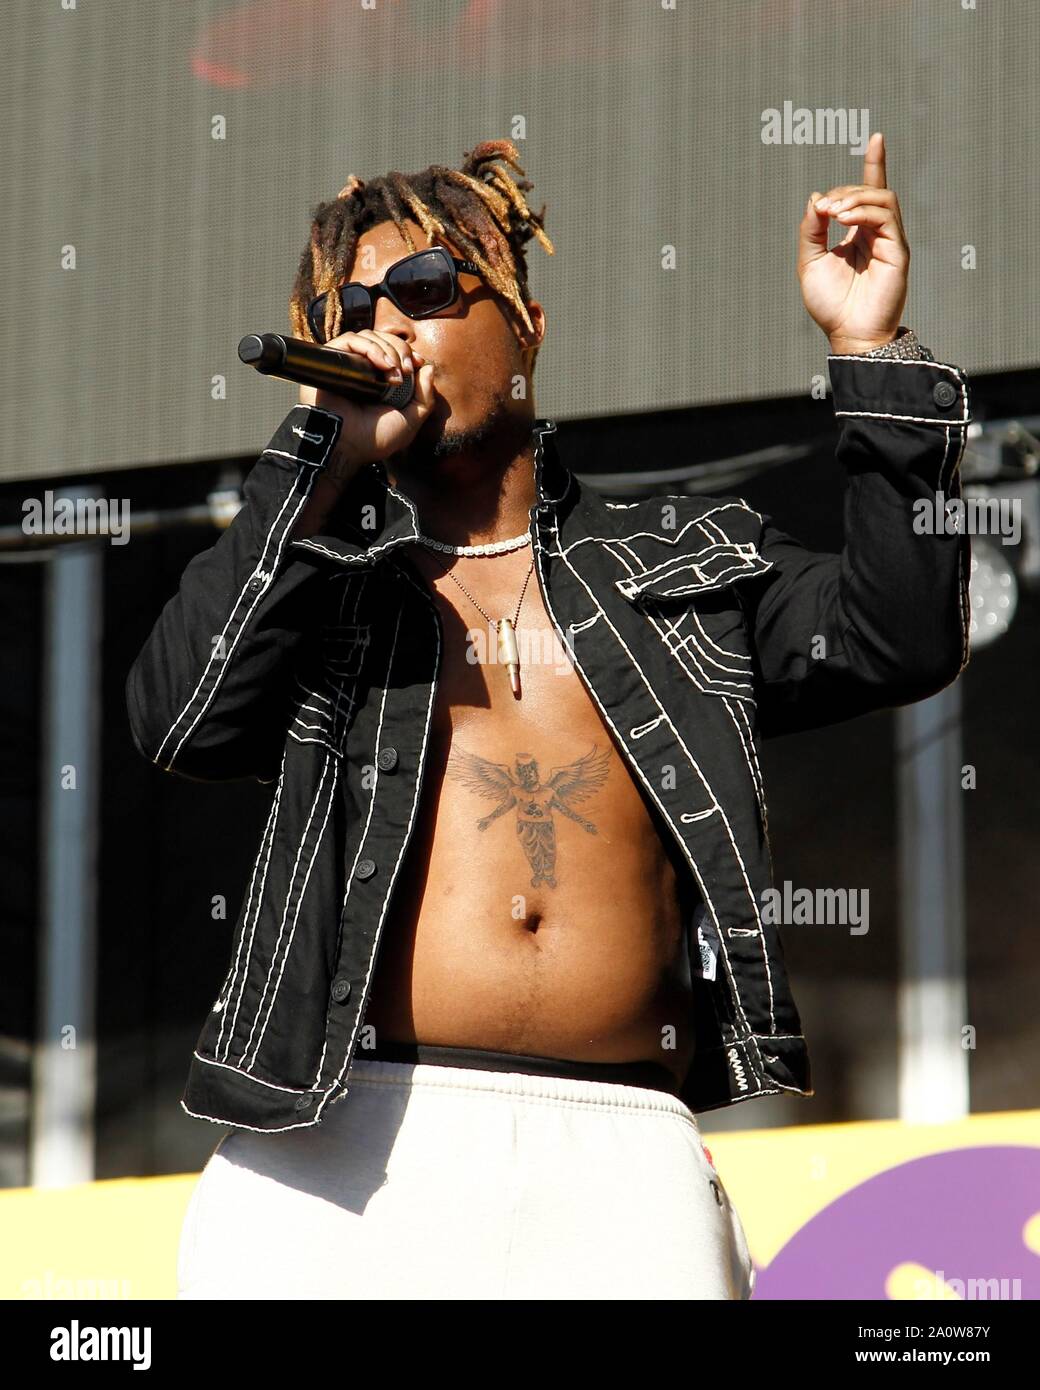 Juice WRLD Outfit from July 18, 2018